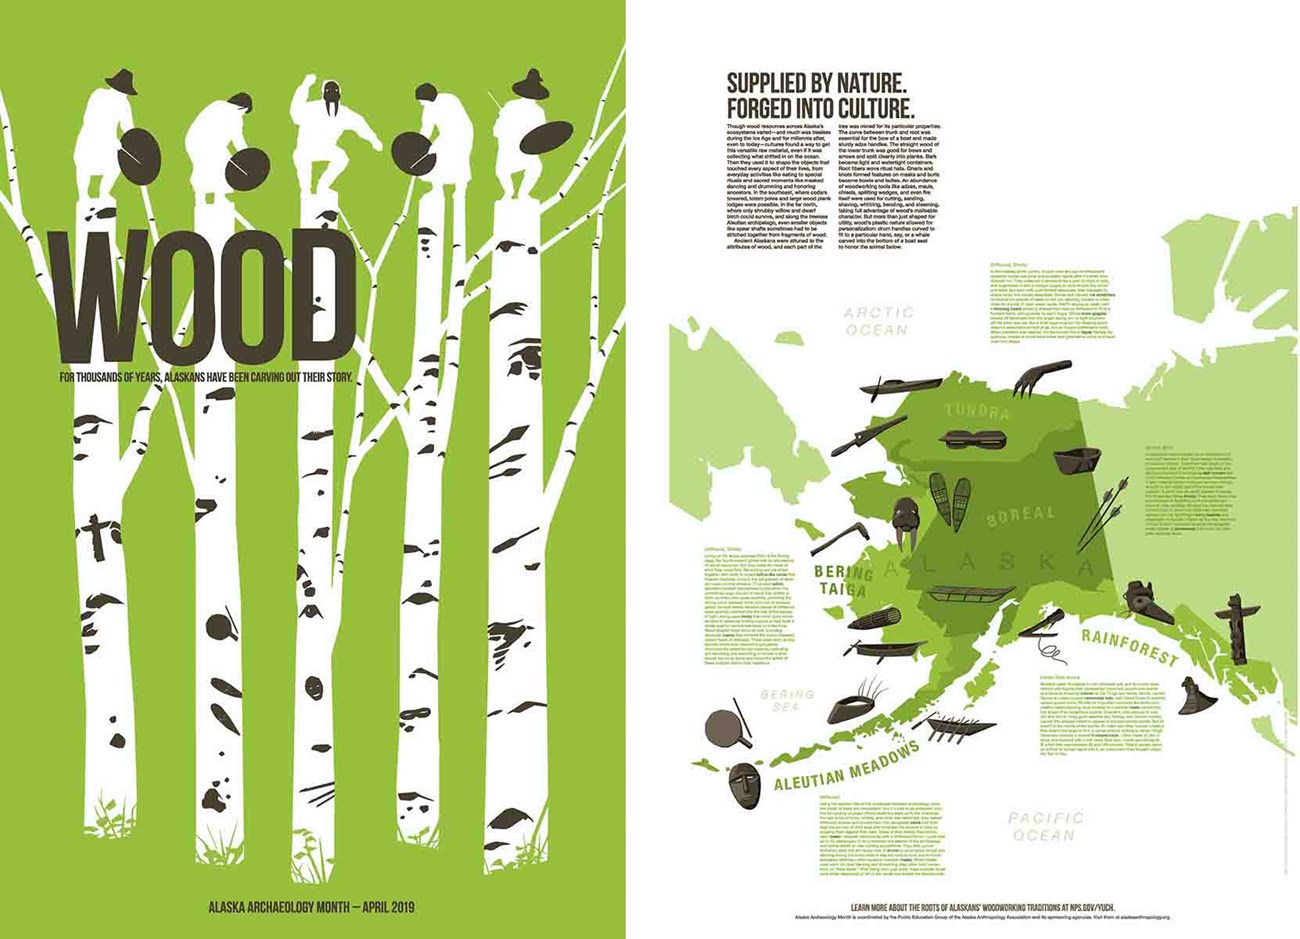 The poster includes birch trees with cultural designs and representations of the people of those cultures, and a map of Alaska with graphic design of the various wood artifacts from different regions of the state and how those artifacts were used.